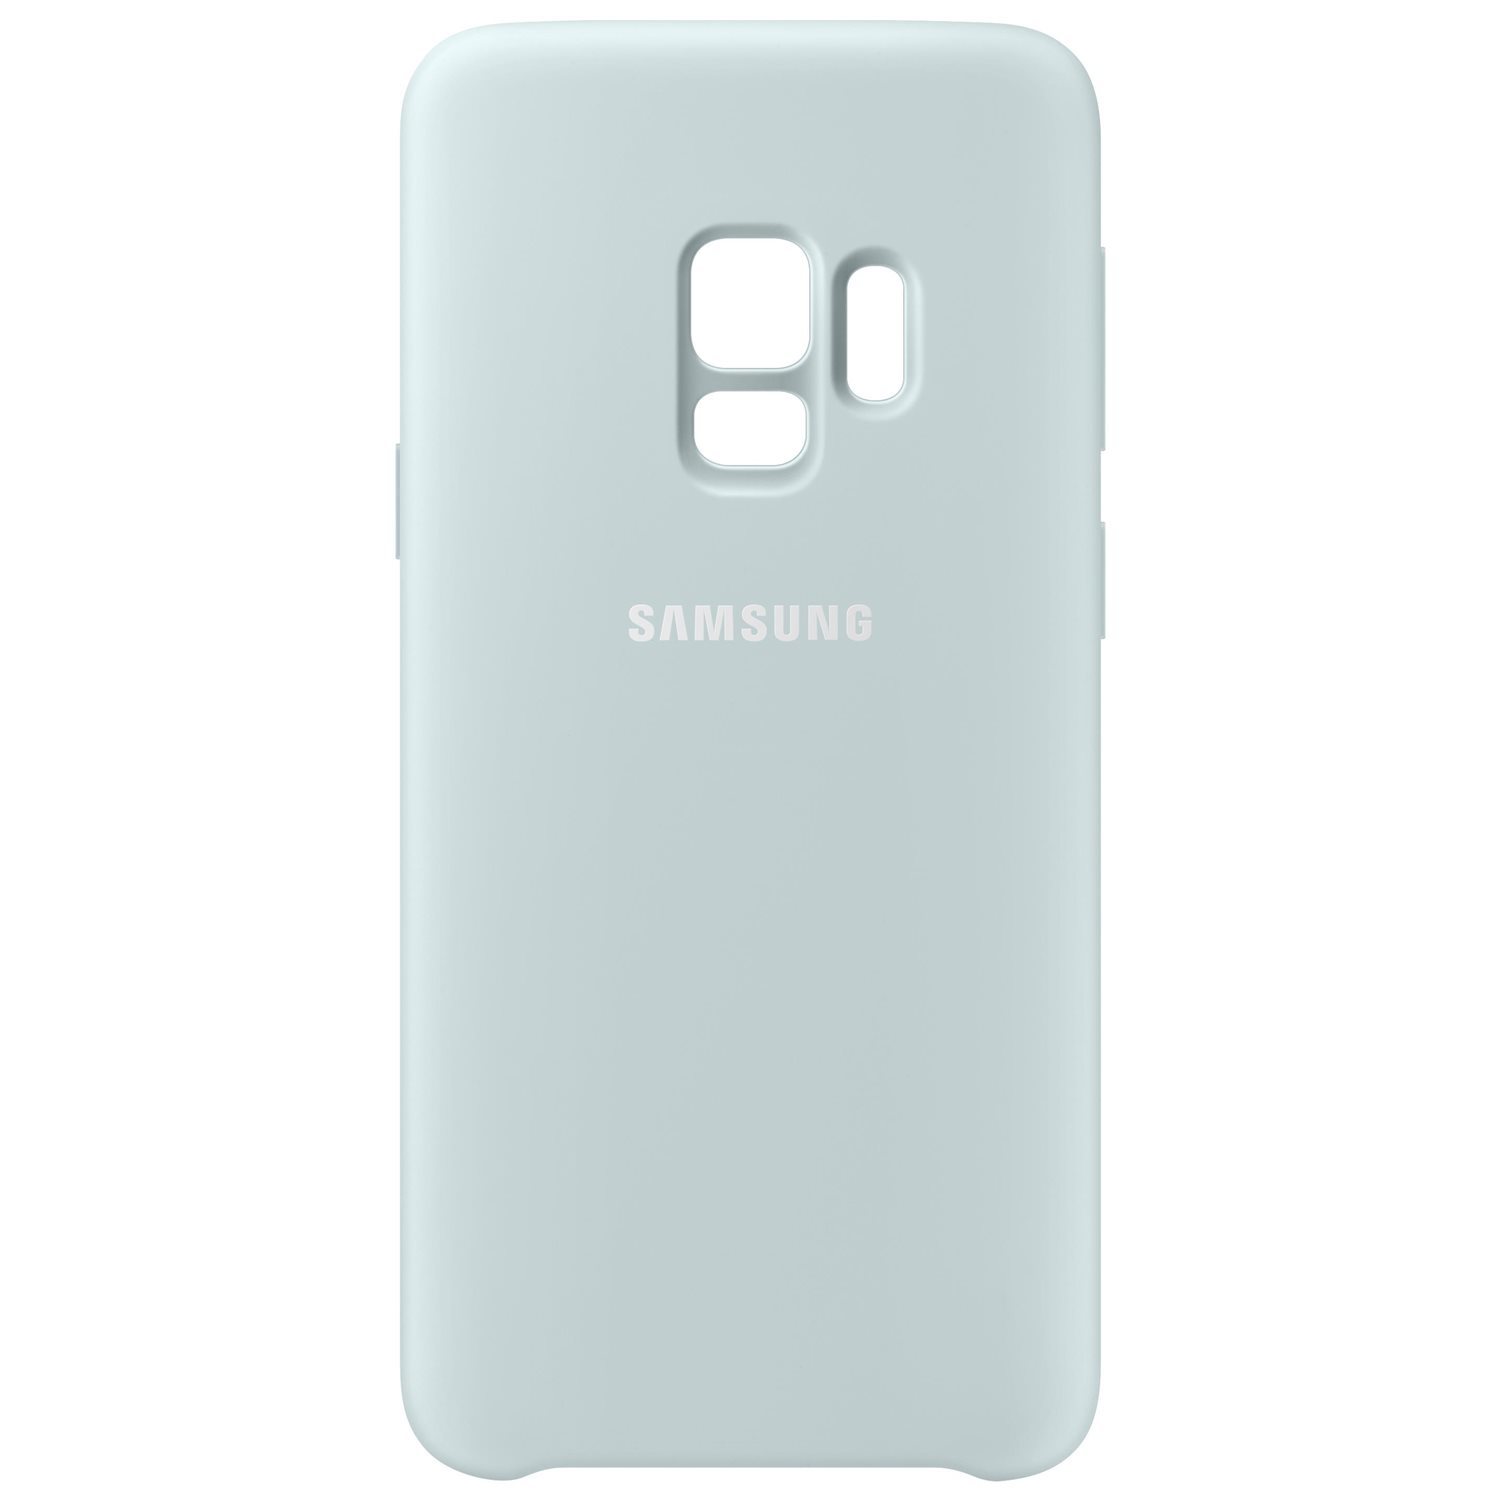 Official Samsung Galaxy S9 Silicone Cover Case - Blue